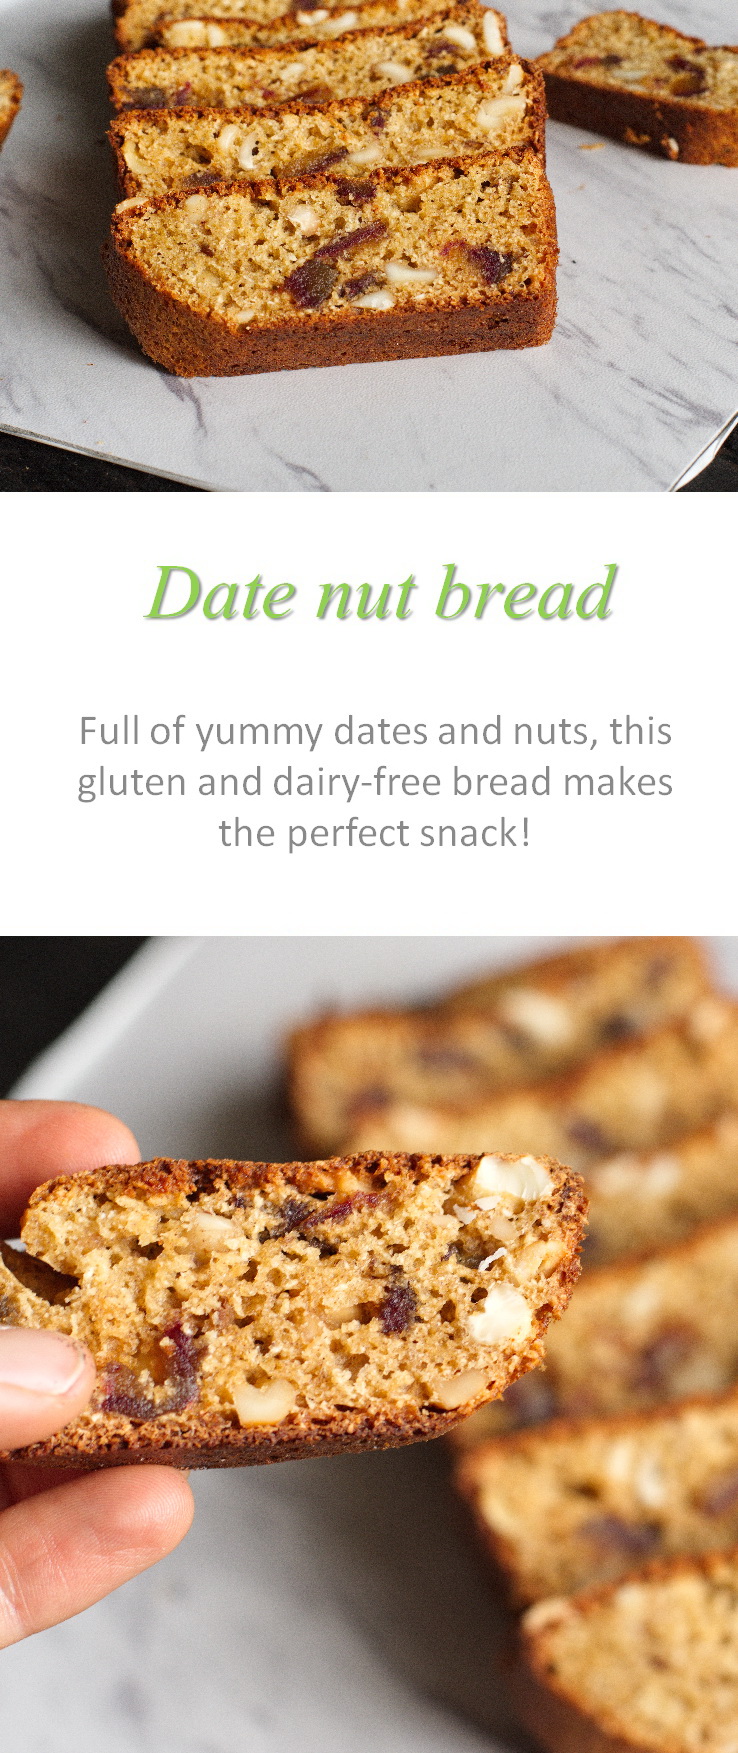 This date nut bread is a moist, fruity gluten and dairy-free bread using dates, with nuts for some crunch, and is the perfect snack! #dates